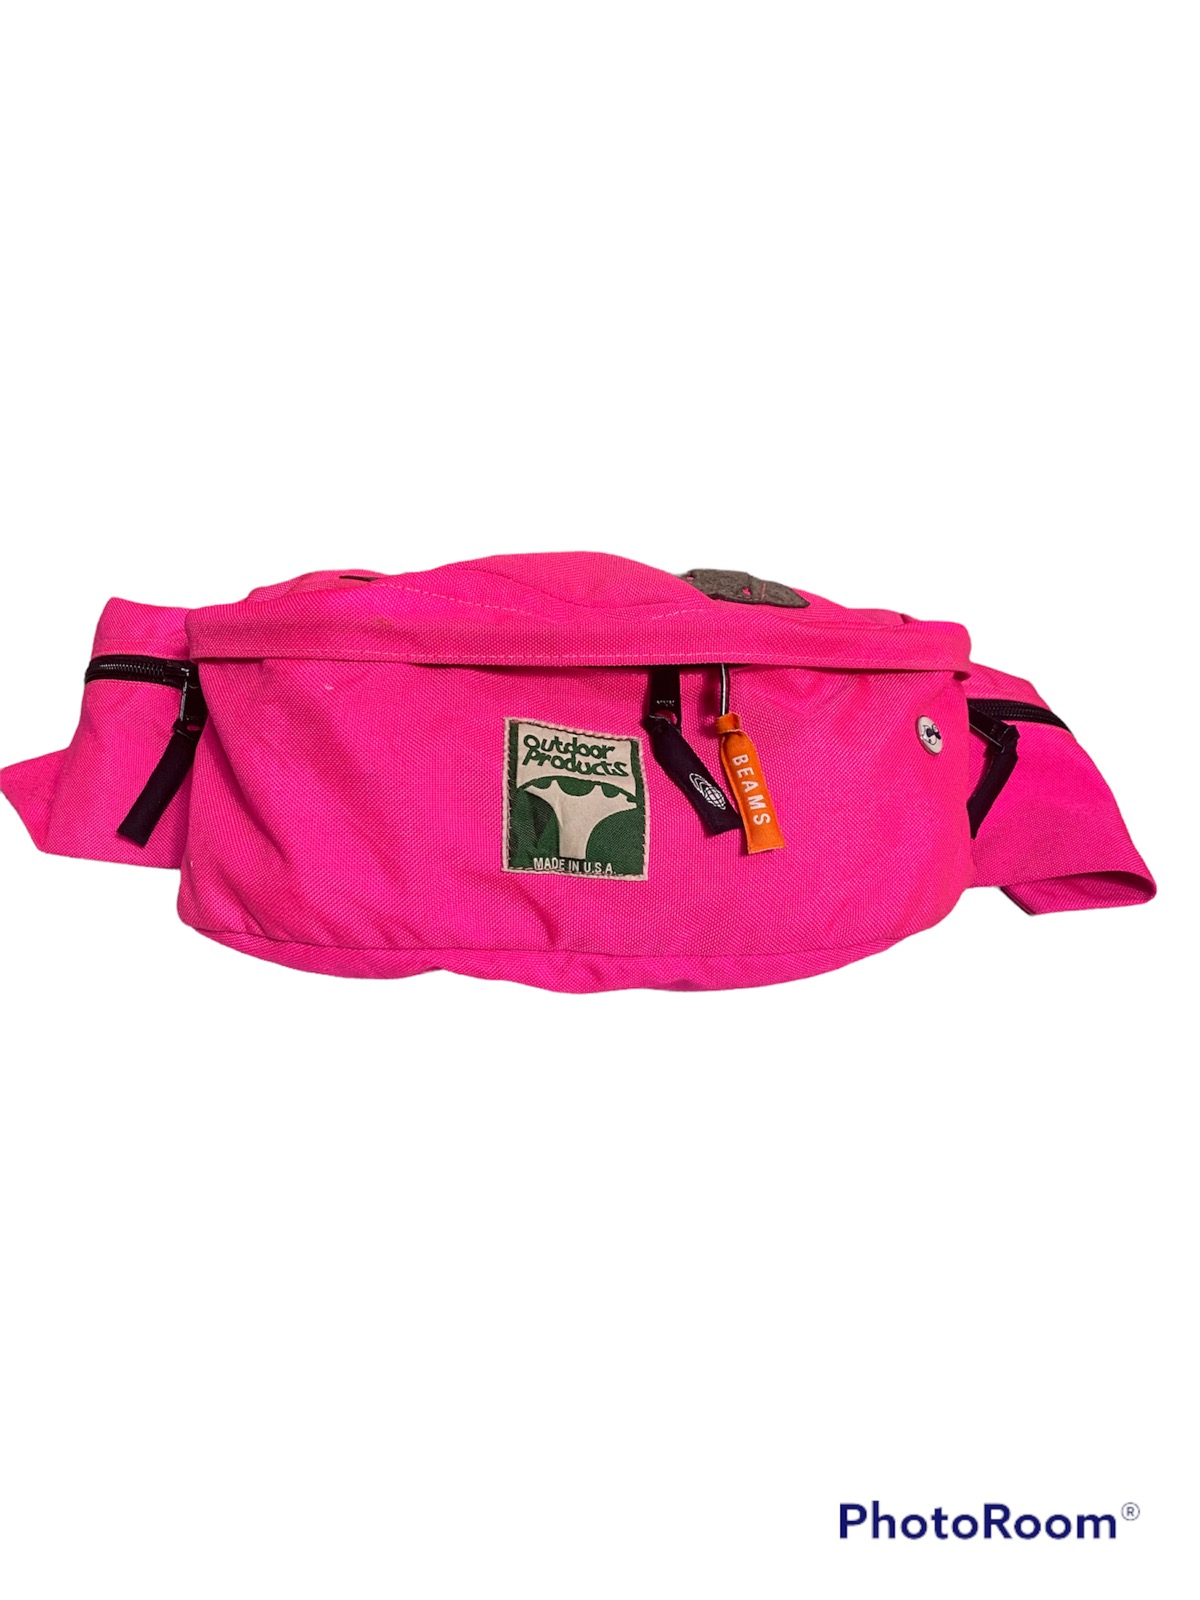 Vintage Outdoor Products X Beams Waist Bag - 1